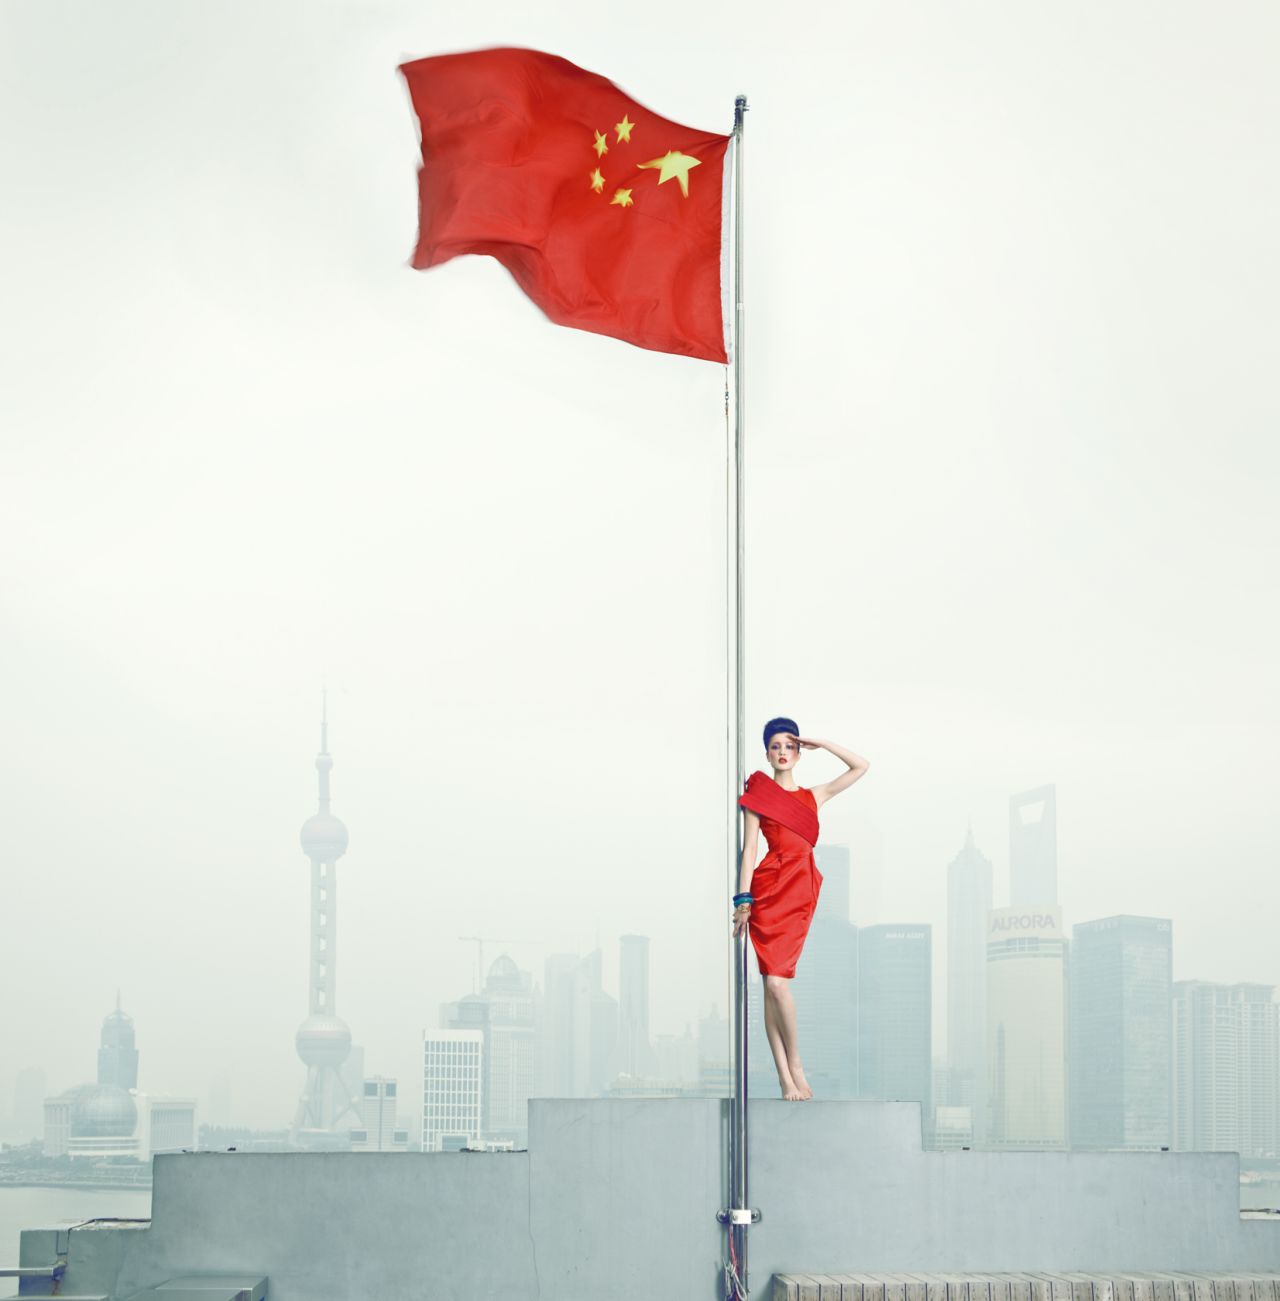 This photo is part of the "Long live the Motherland" series that appeared in Vogue in 2010. The Shanghai skyline appears in the background.